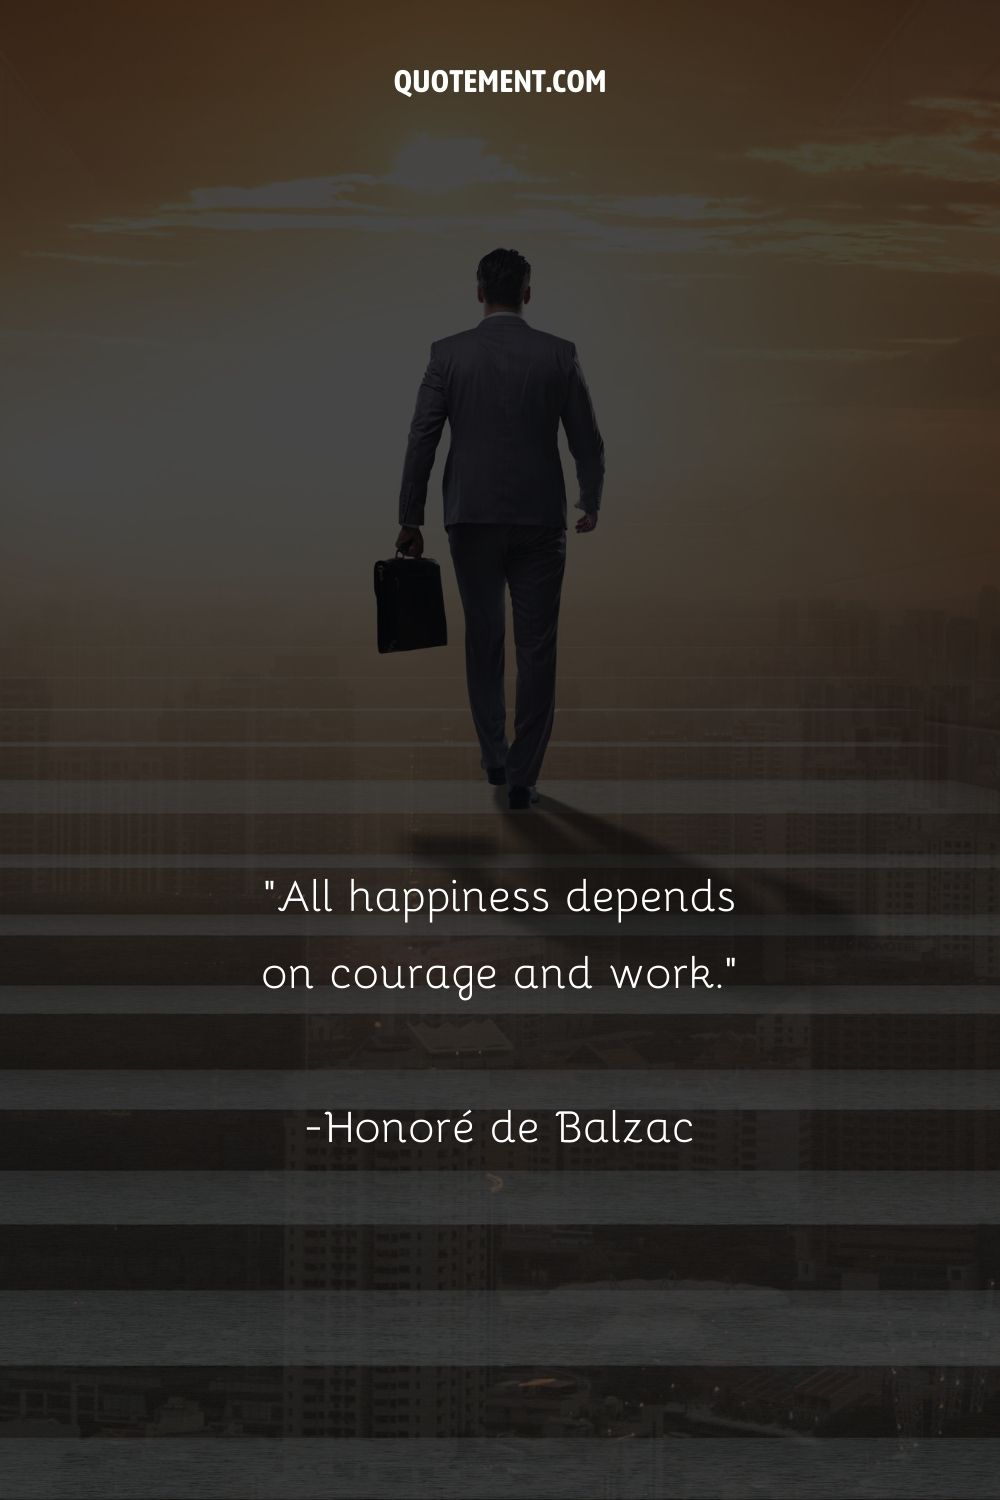 All happiness depends on courage and work